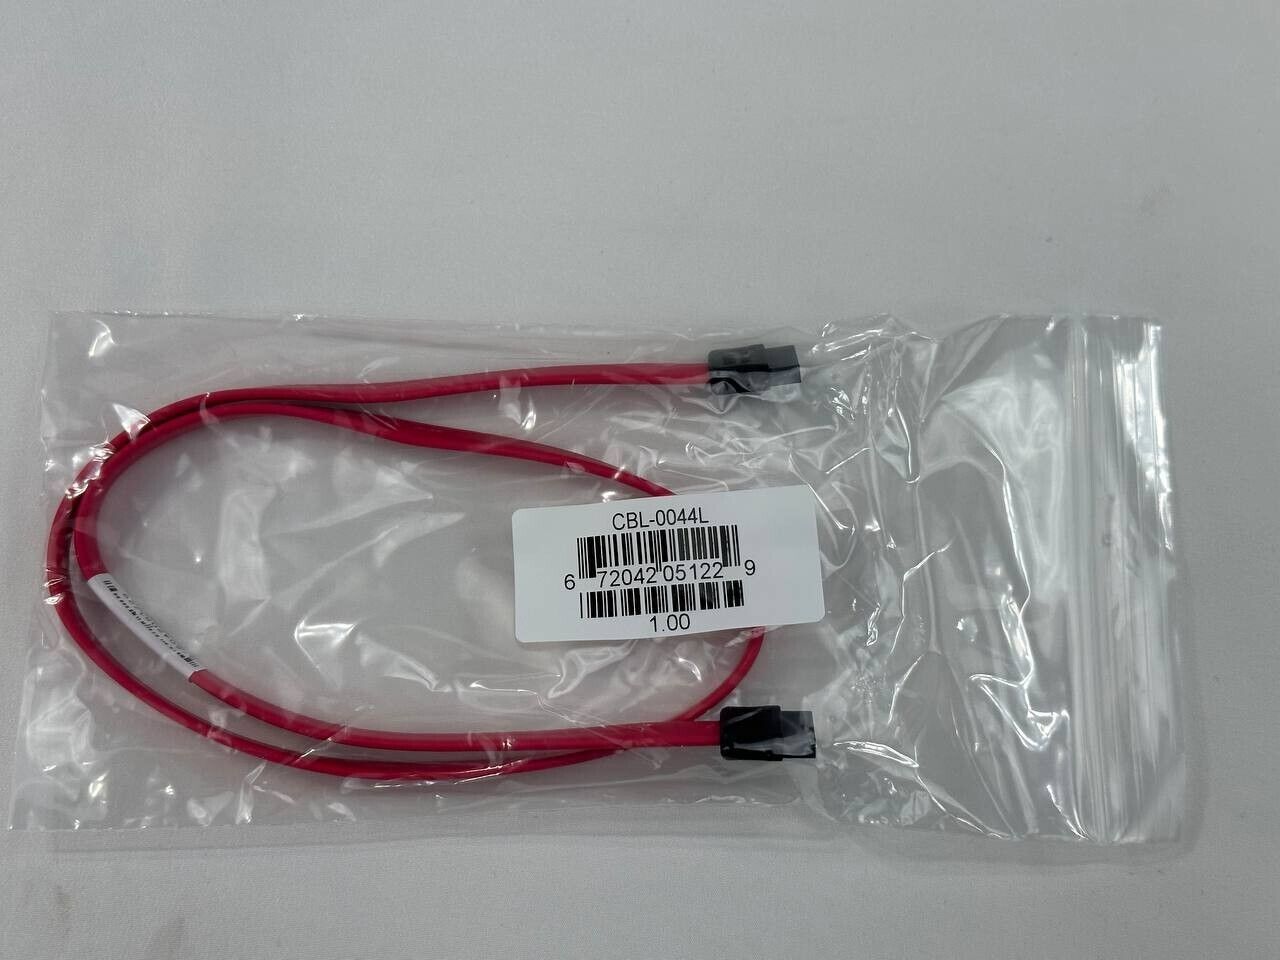 Lot of 20 Supermicro SATA3 57.5cm Cable CBL-0044L 2ft Flat Straight-Straight